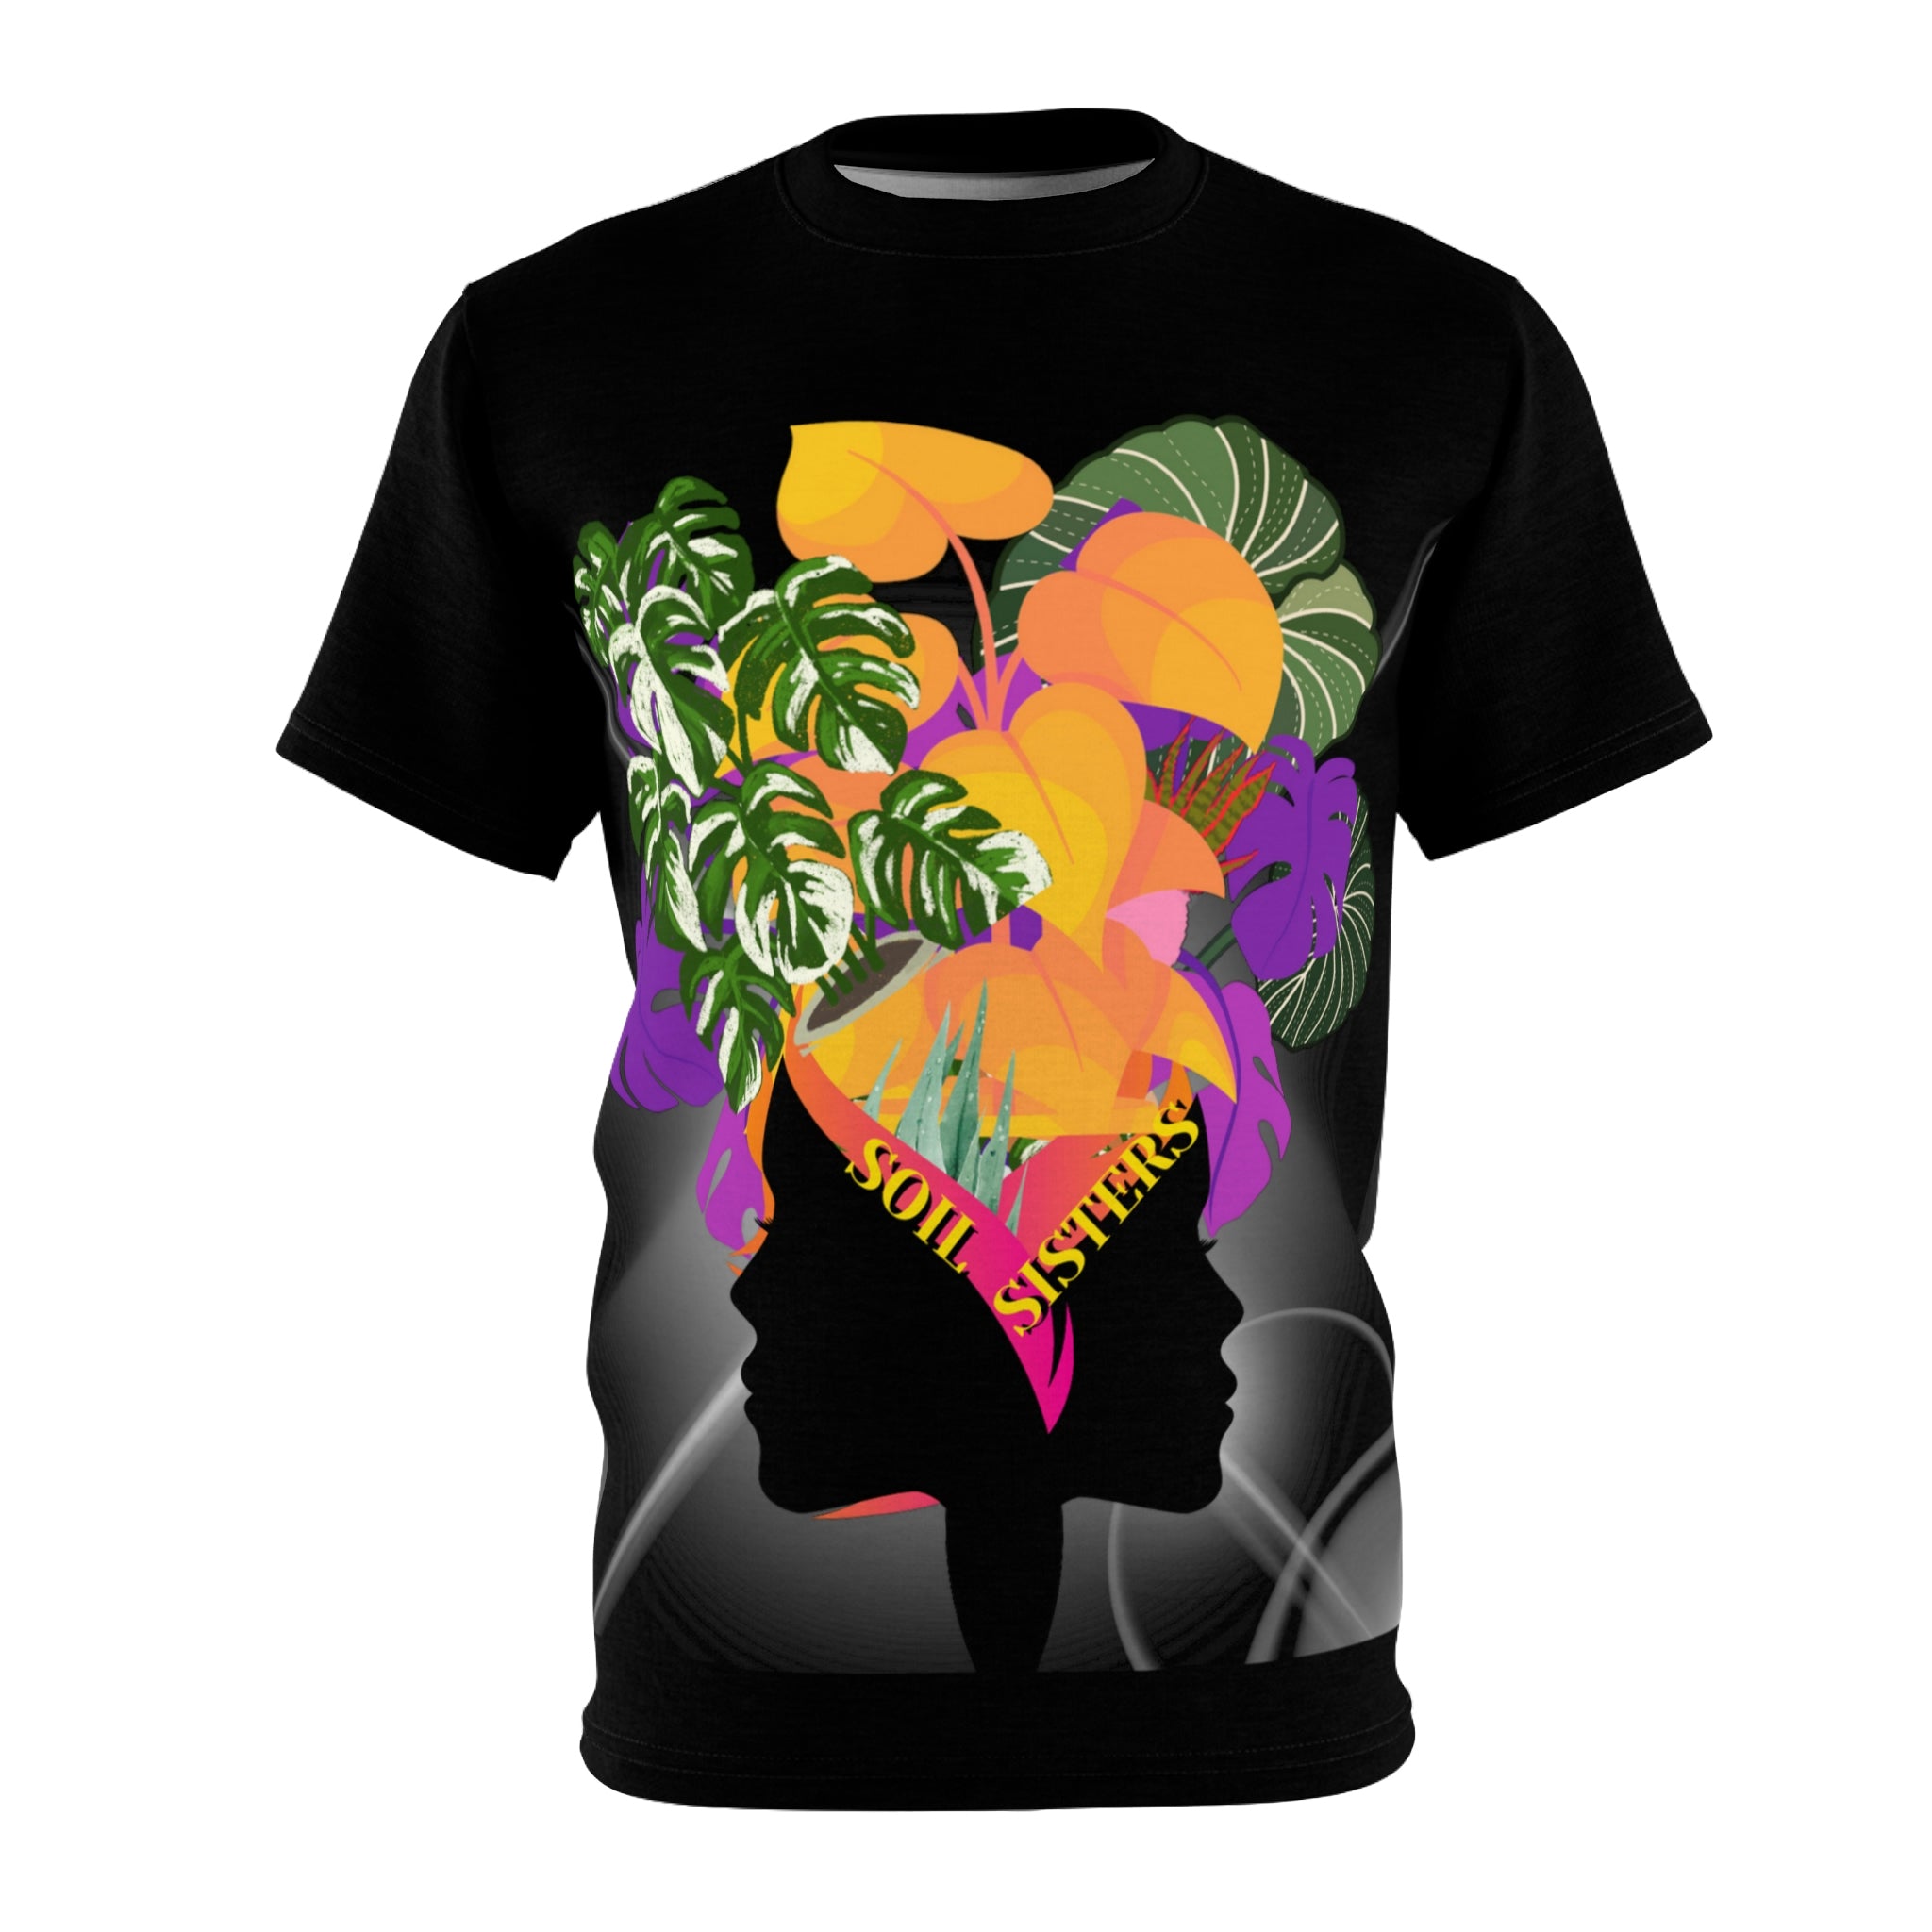 The "Soil Sisters" Unisex  Exclusive by Luv Farms - SHOP LUV FARMS